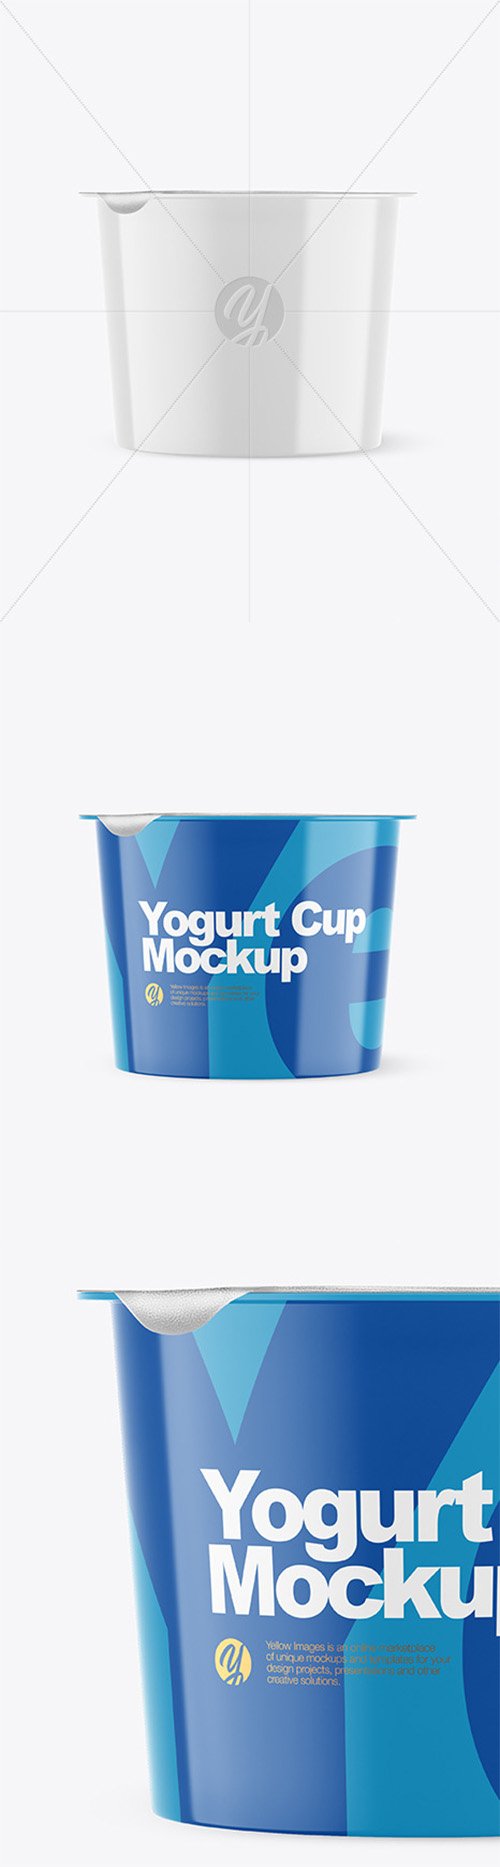 Glossy Plastic Yogurt Cup With Foil Lid Mockup - Front View 66253 TIF